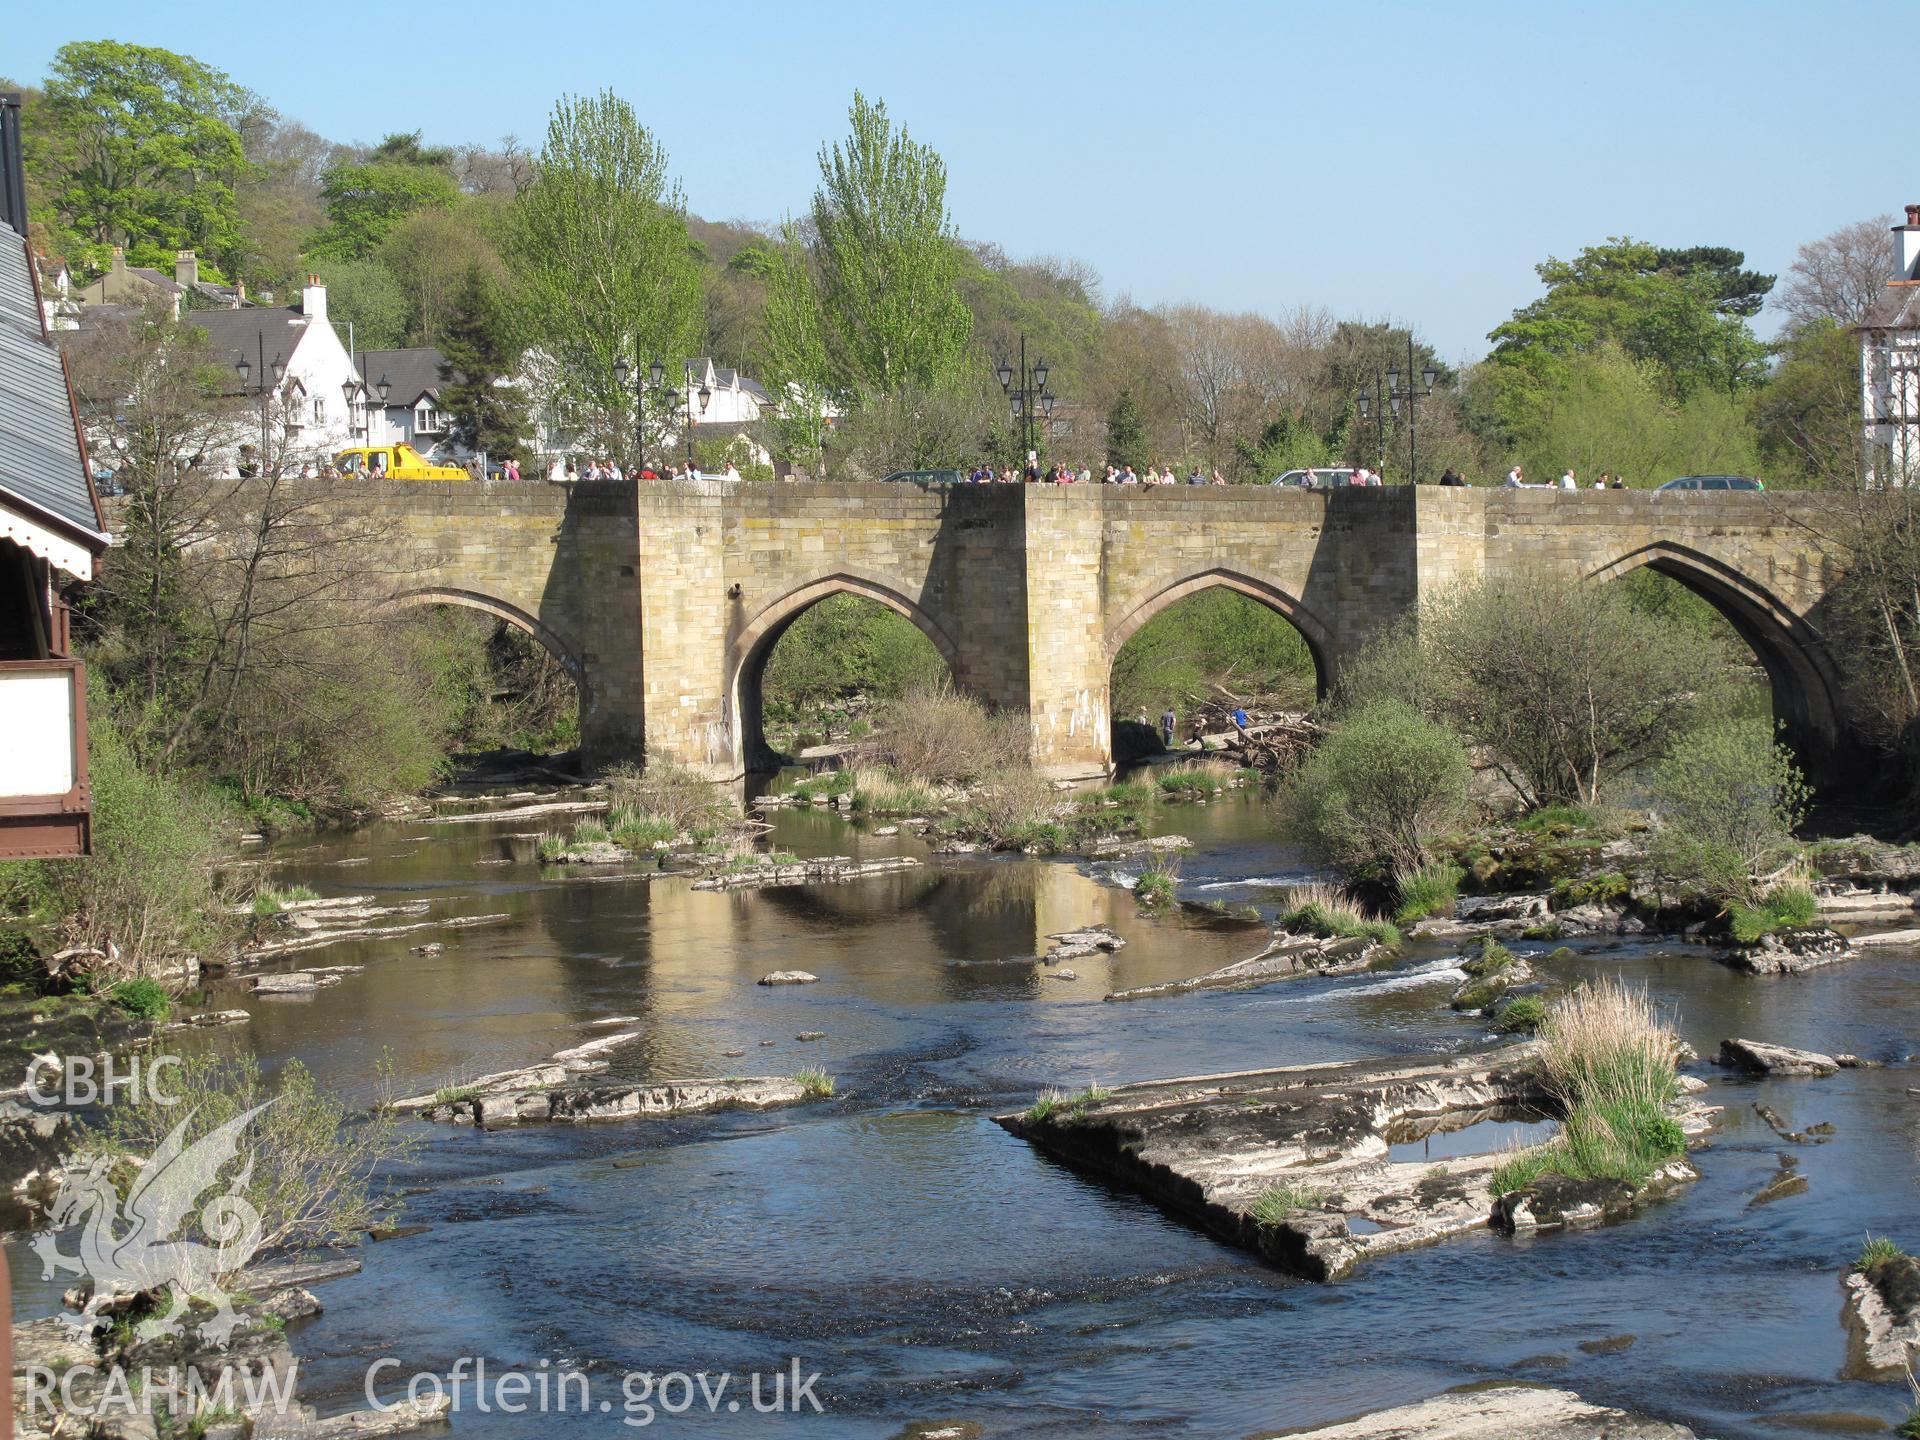 View of Llangollen Bridge from the west, taken by Brian Malaws on 19 April 2009.